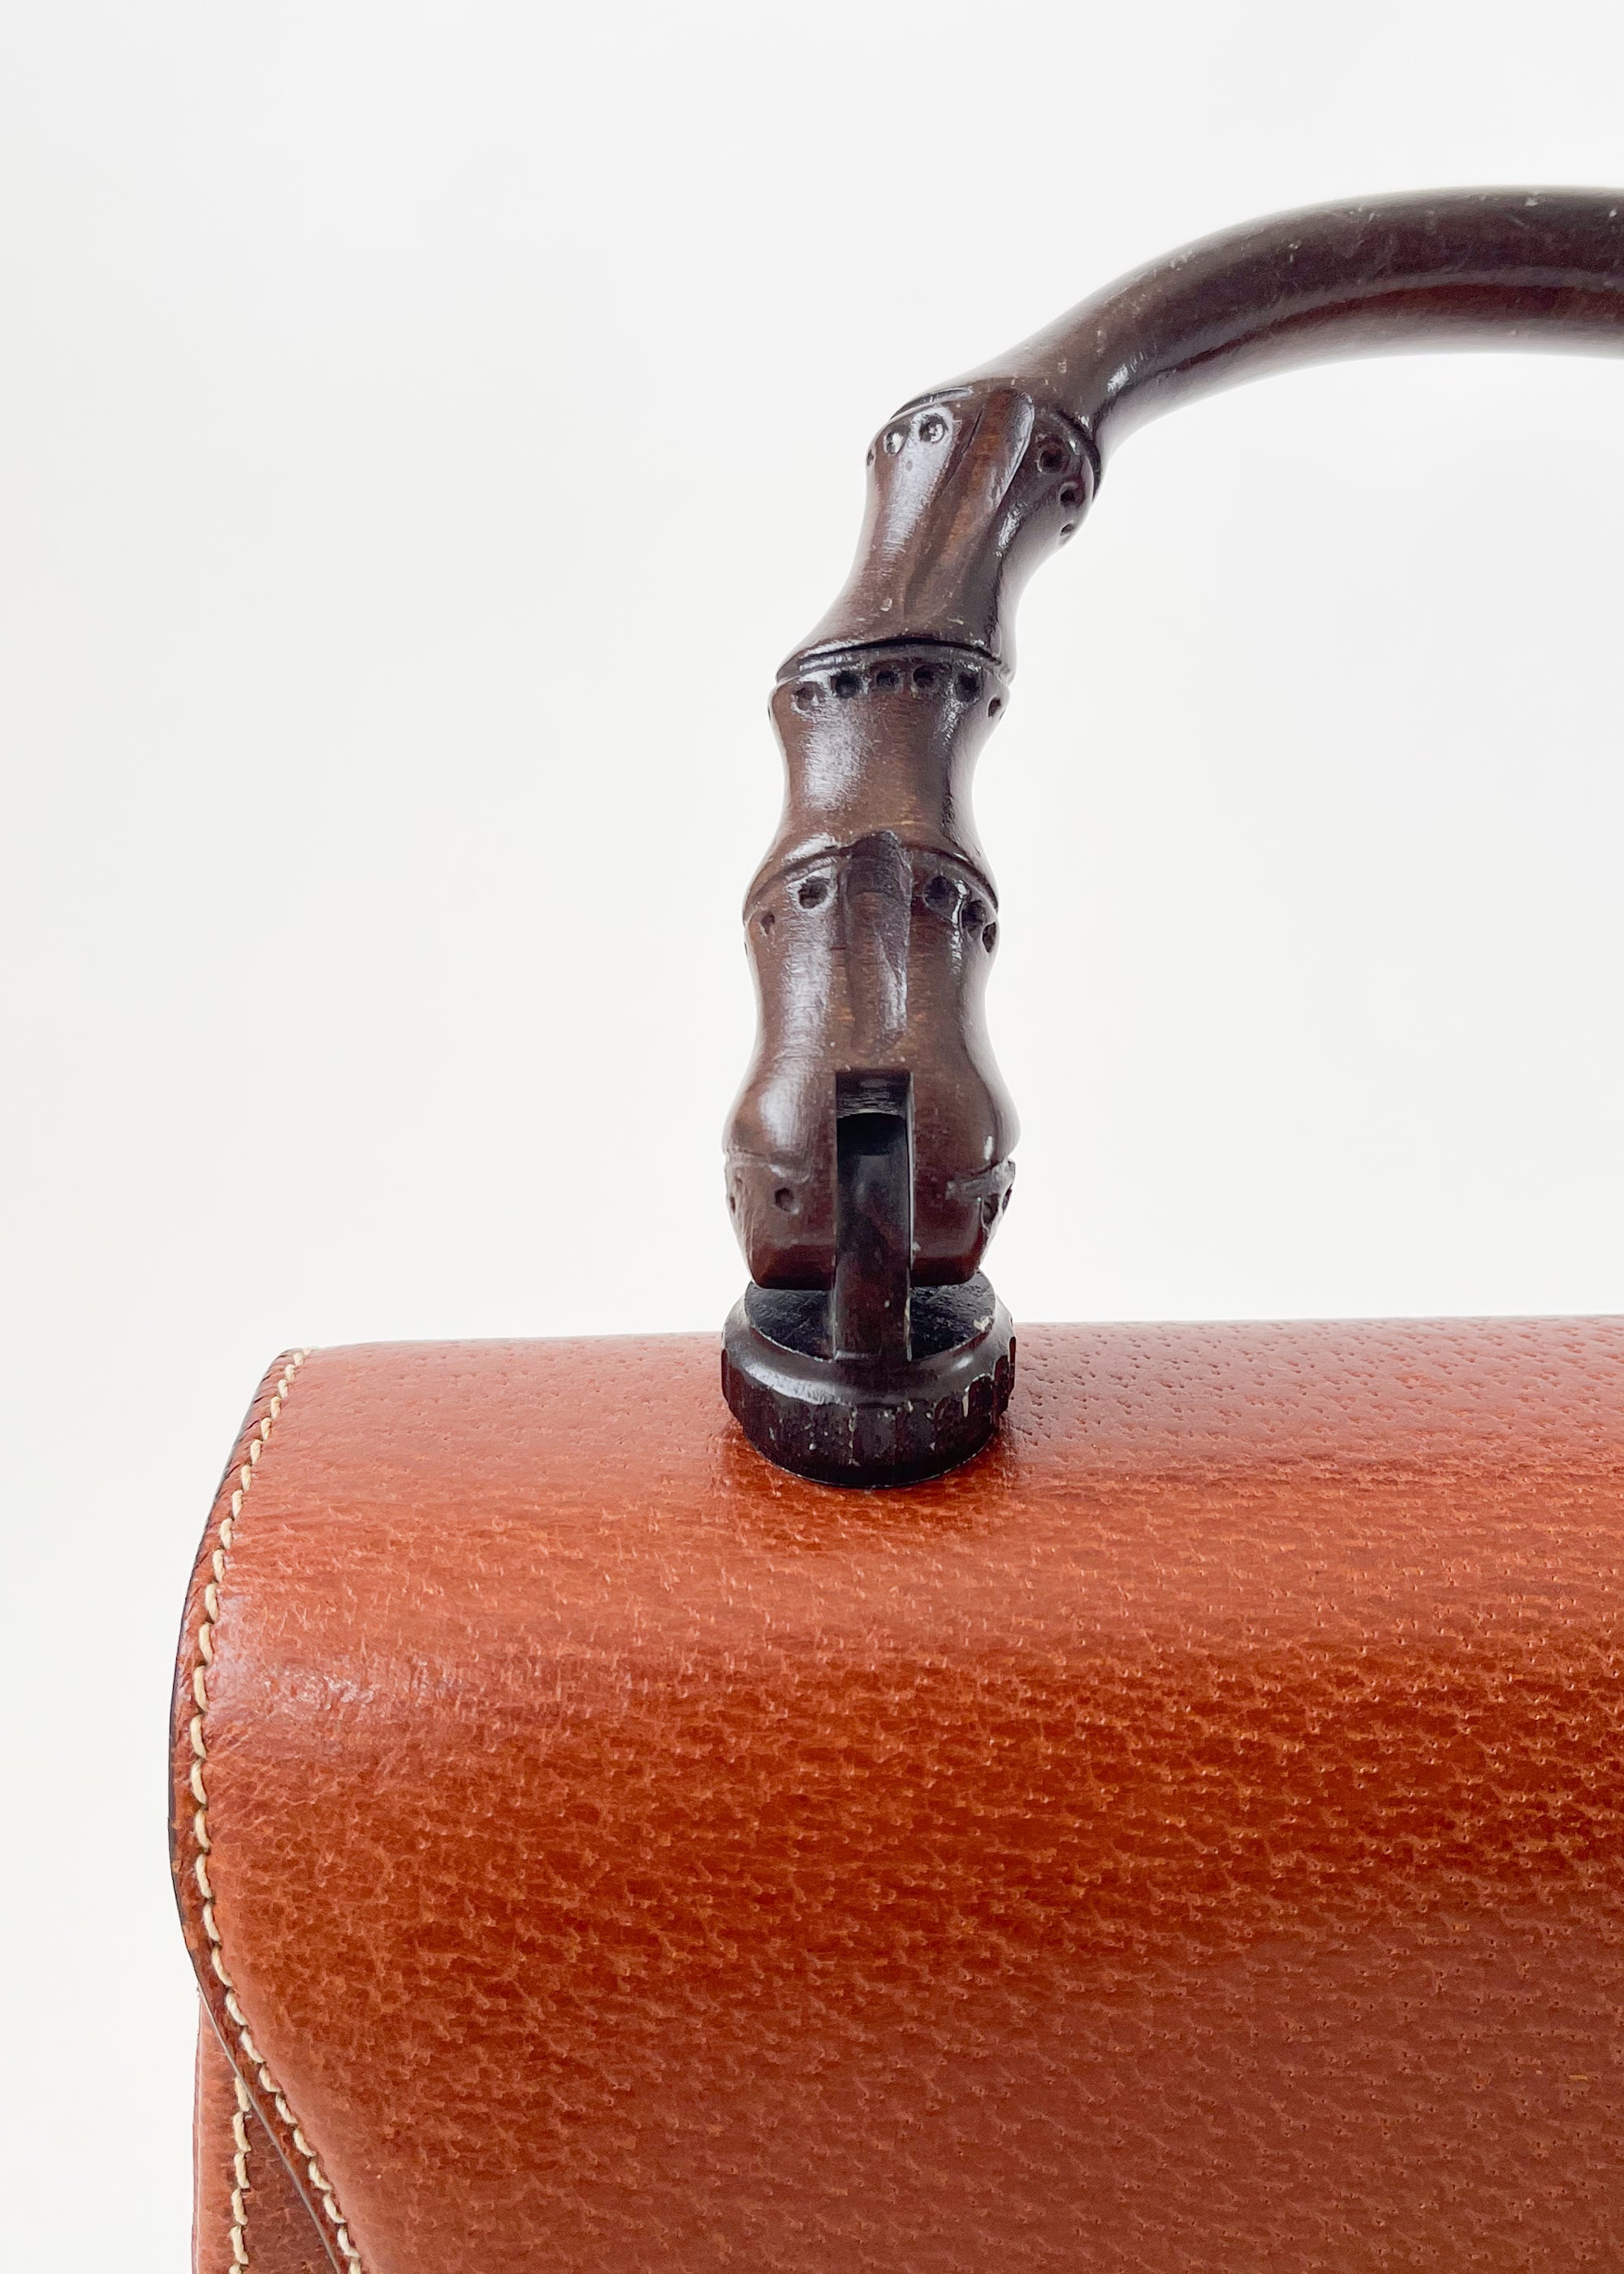 Wooden Leather Bag